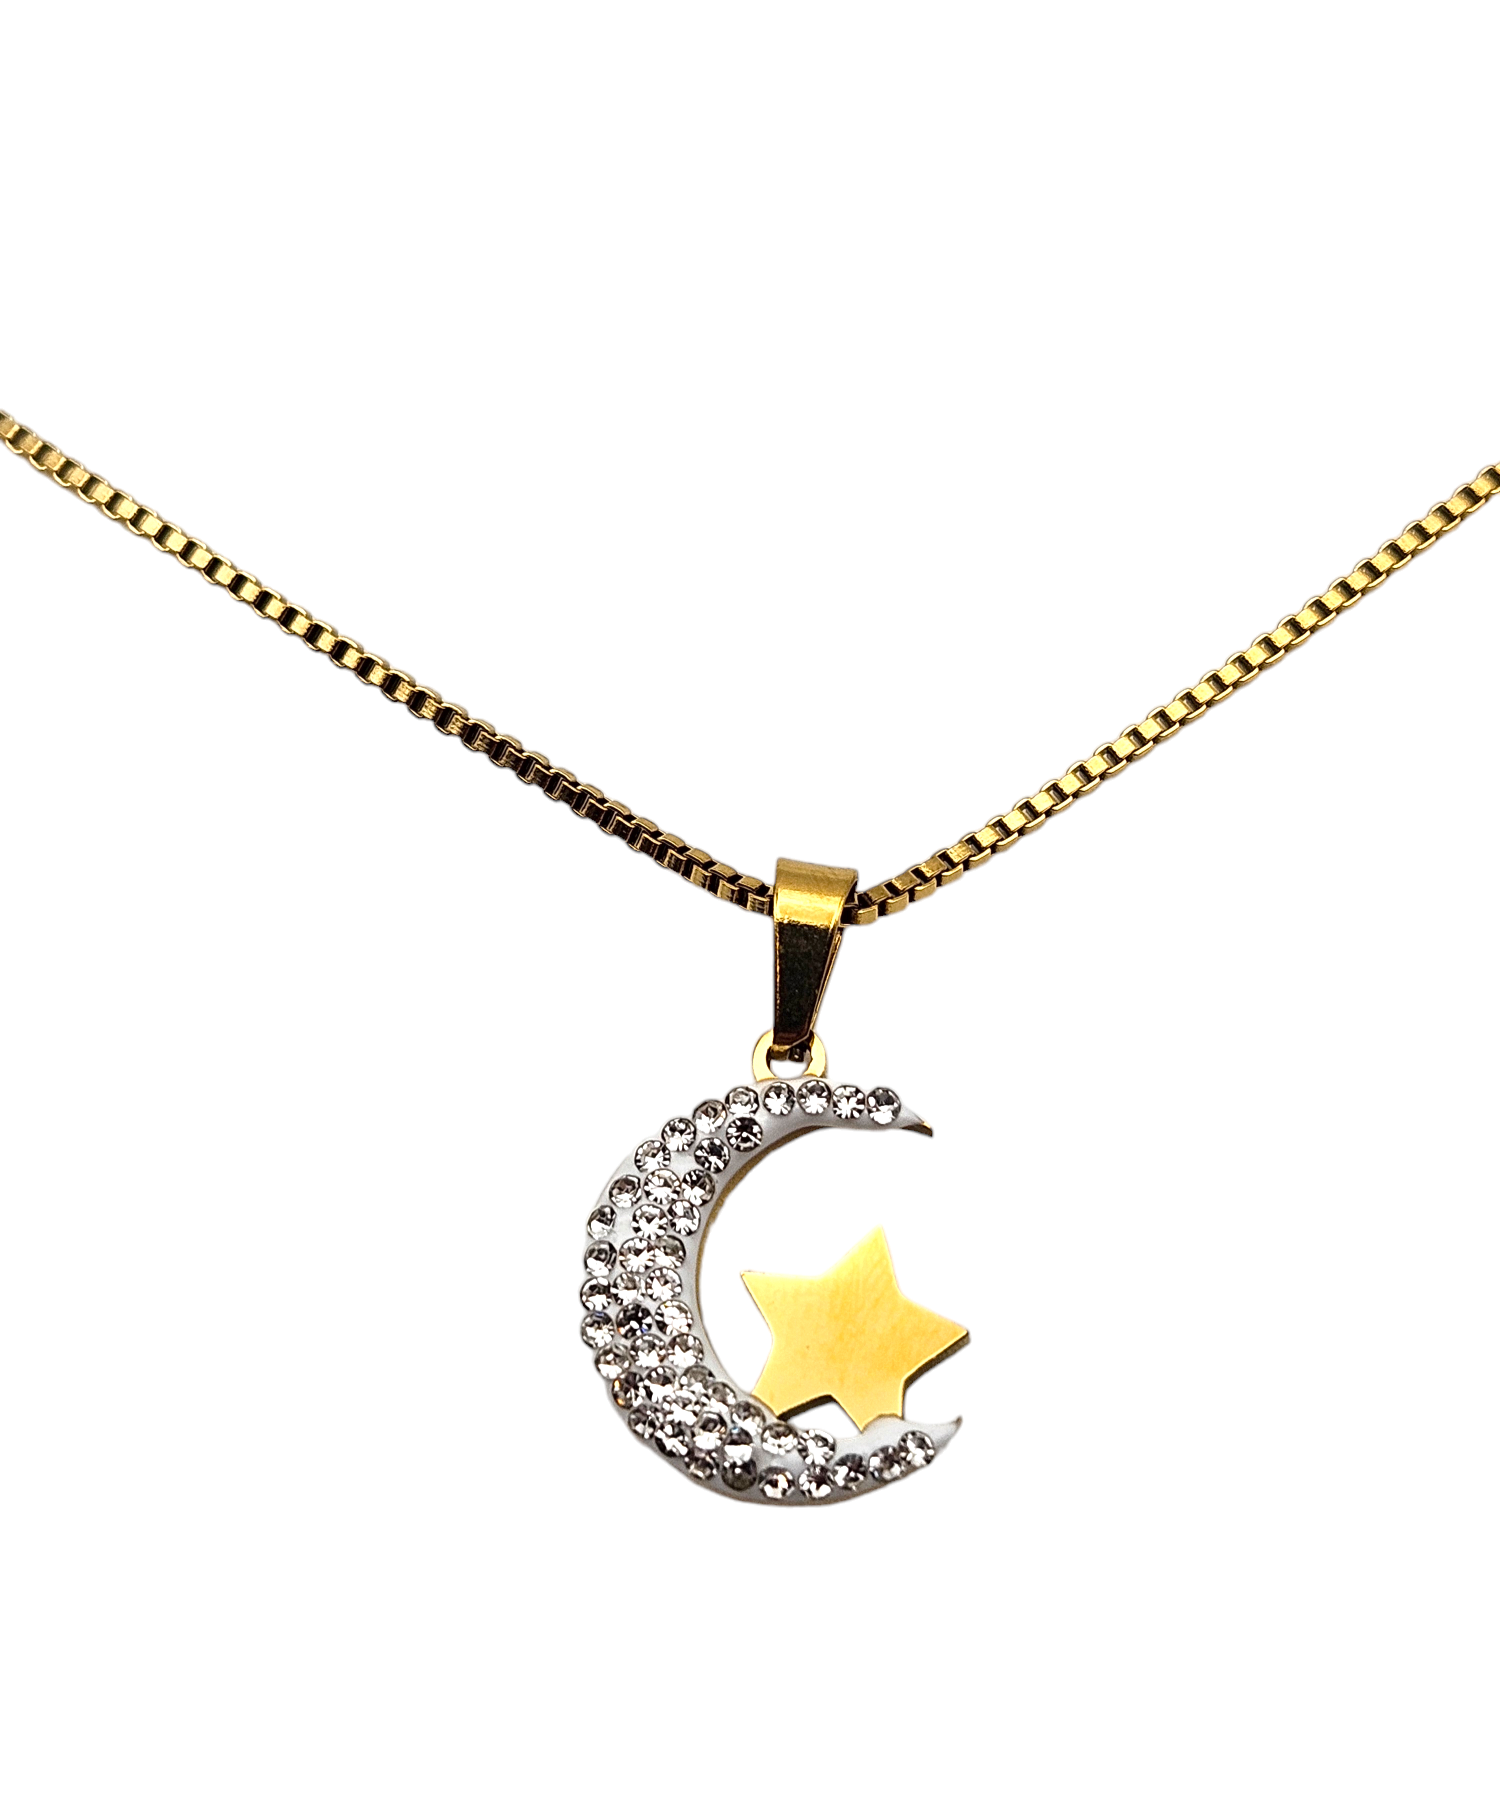 Moon and Star Necklace - Youth Young Adult